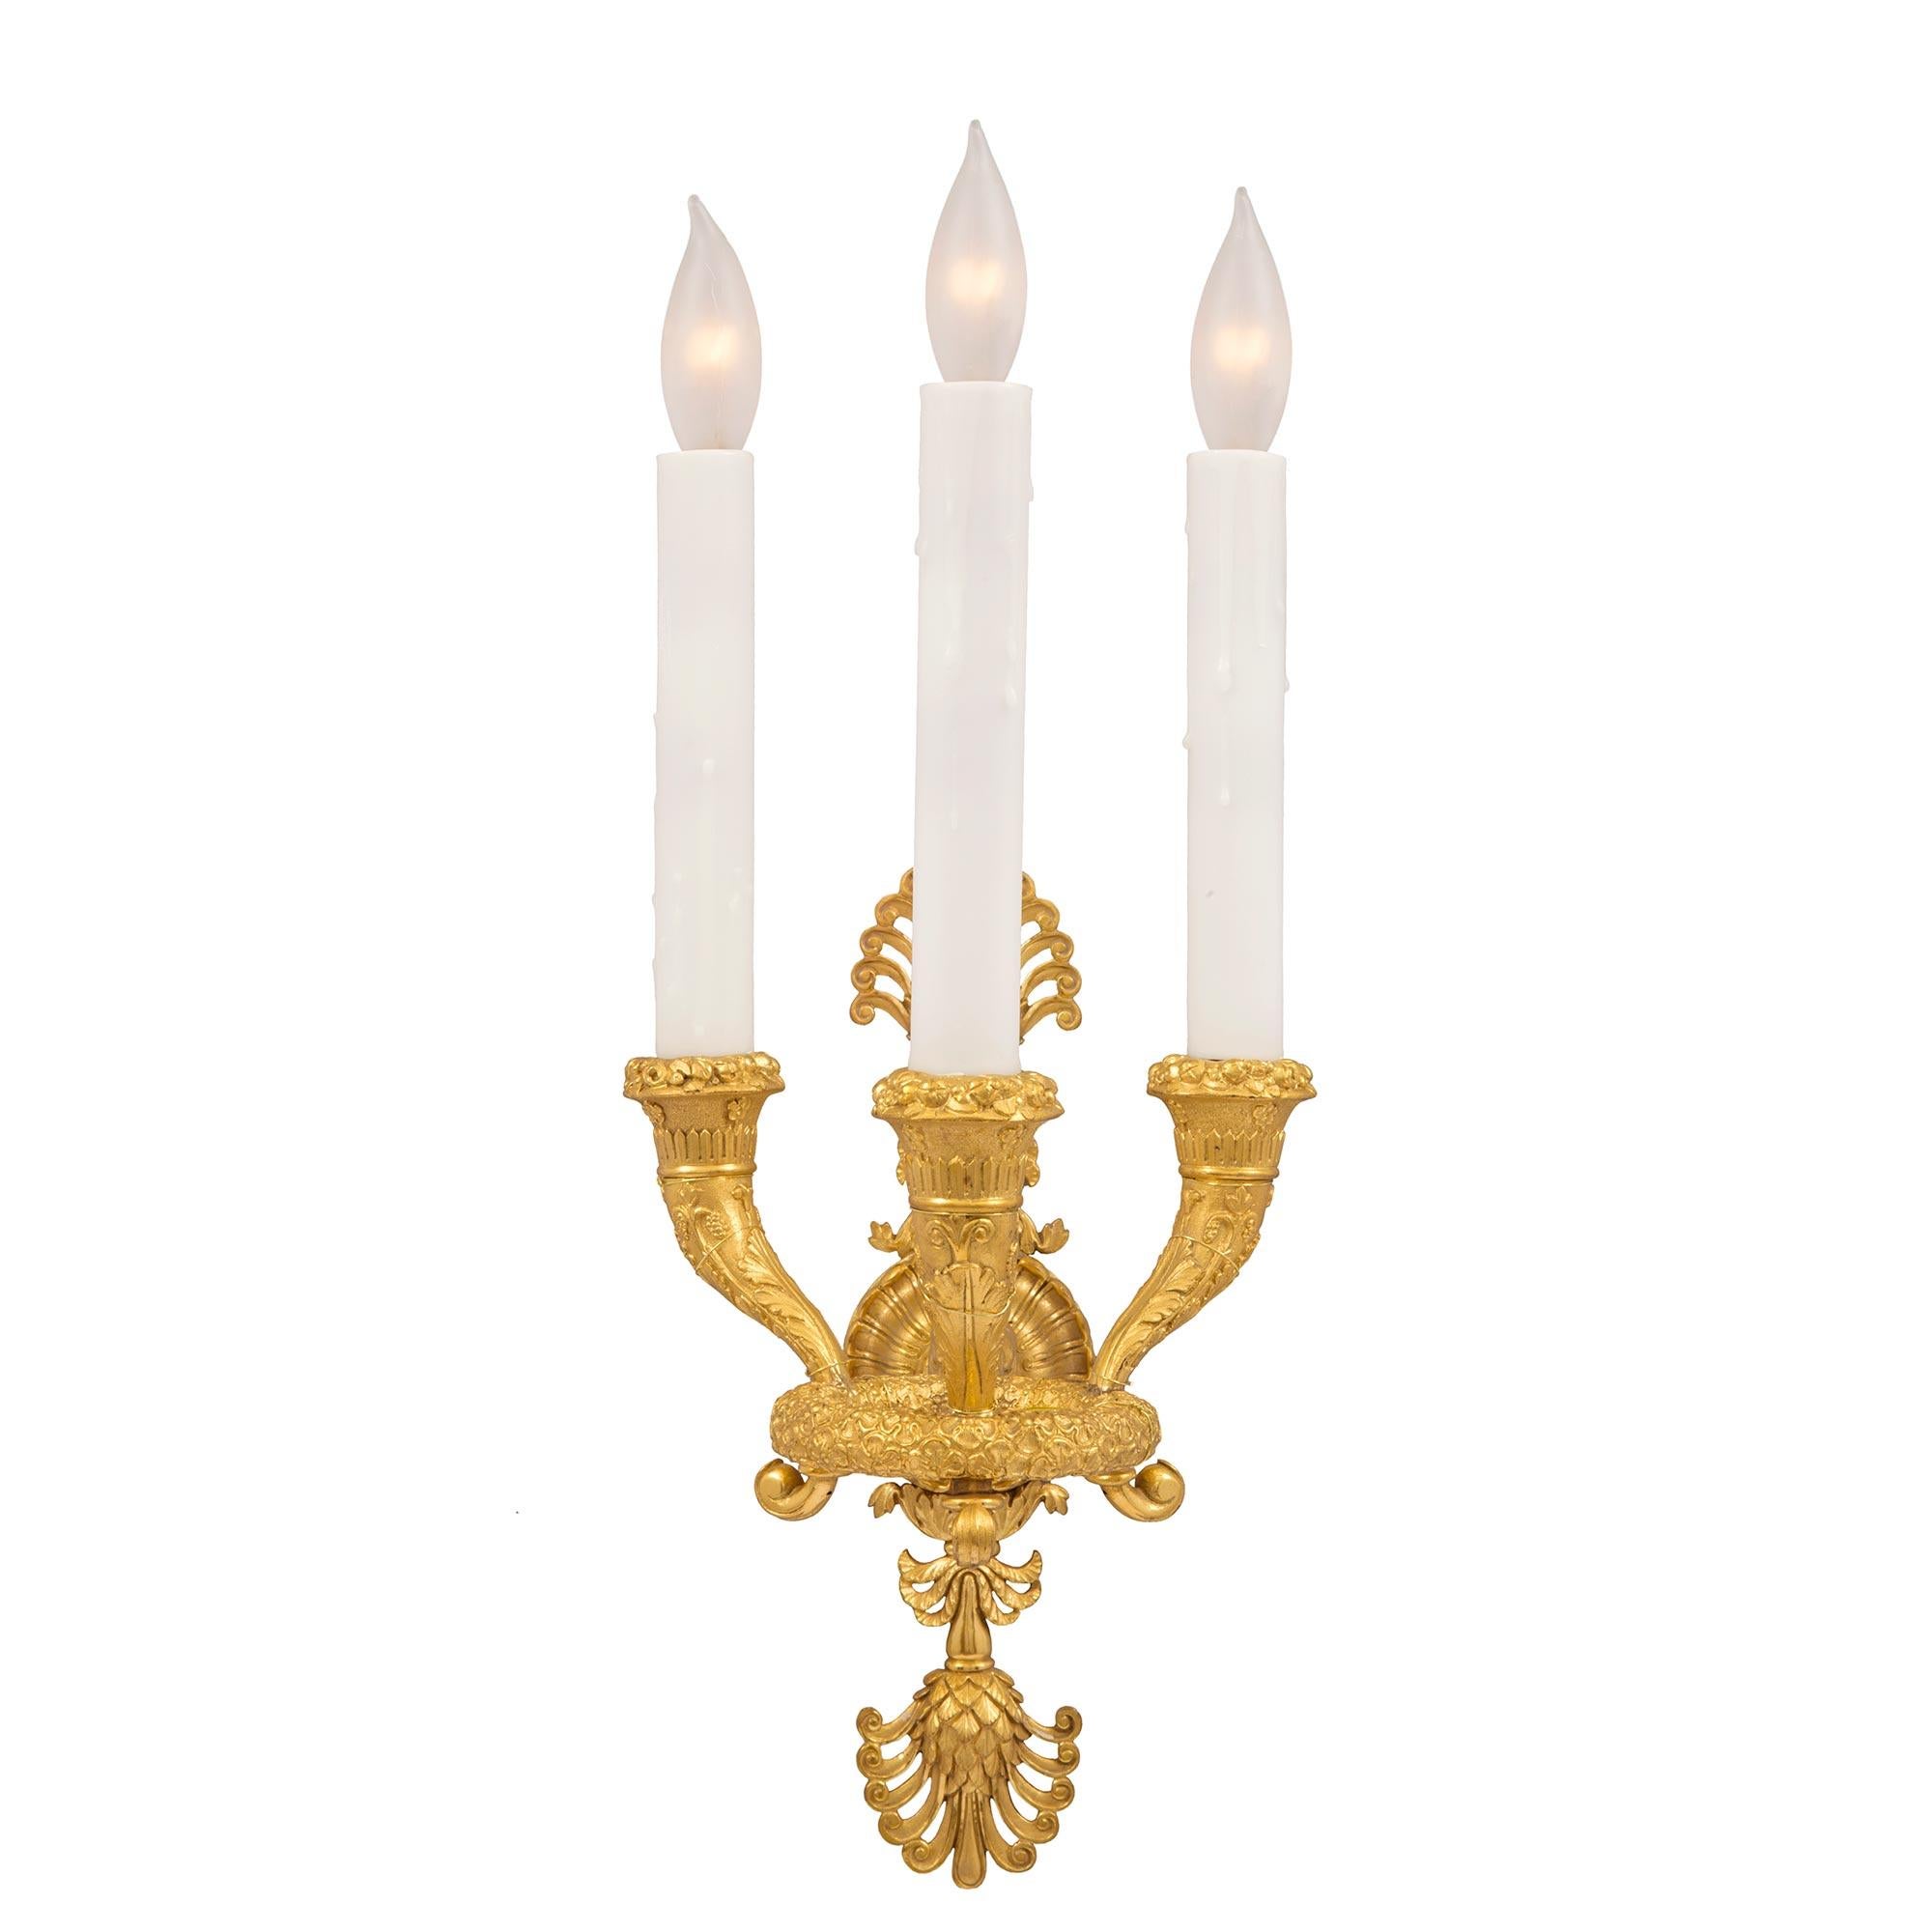 A stunning high quality complete set of six French 19th century Neo-Classical st. three arm ormolu sconces. Each sconce in centered by a striking pierced palmette backplate from where a most impressive scrolled swan's neck extends. The swan's neck